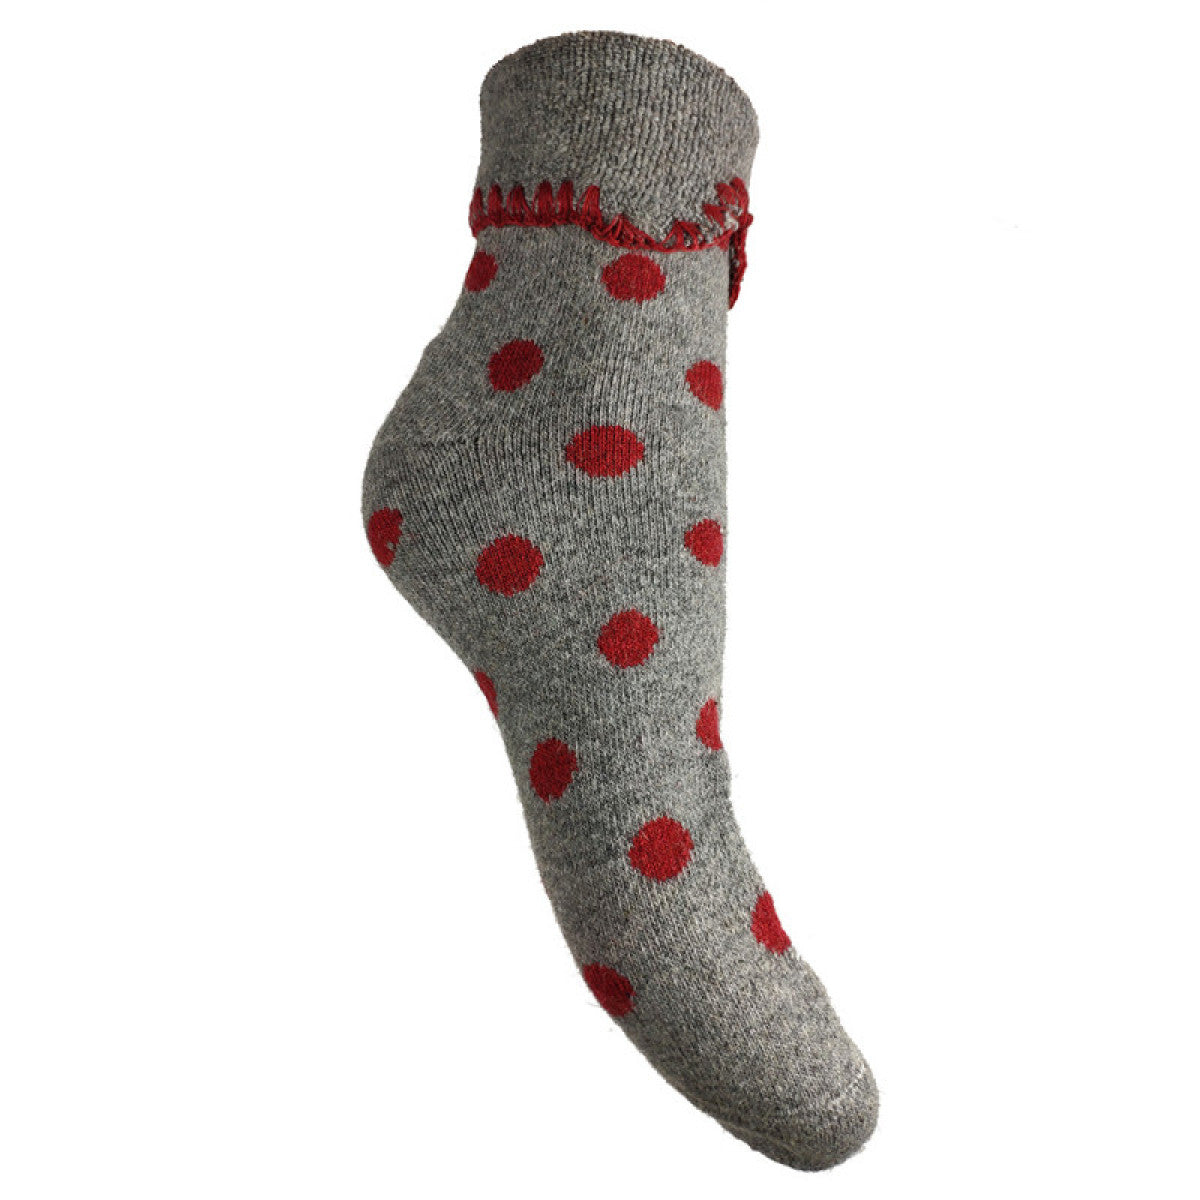 Grey Cuff Socks with Red Spots